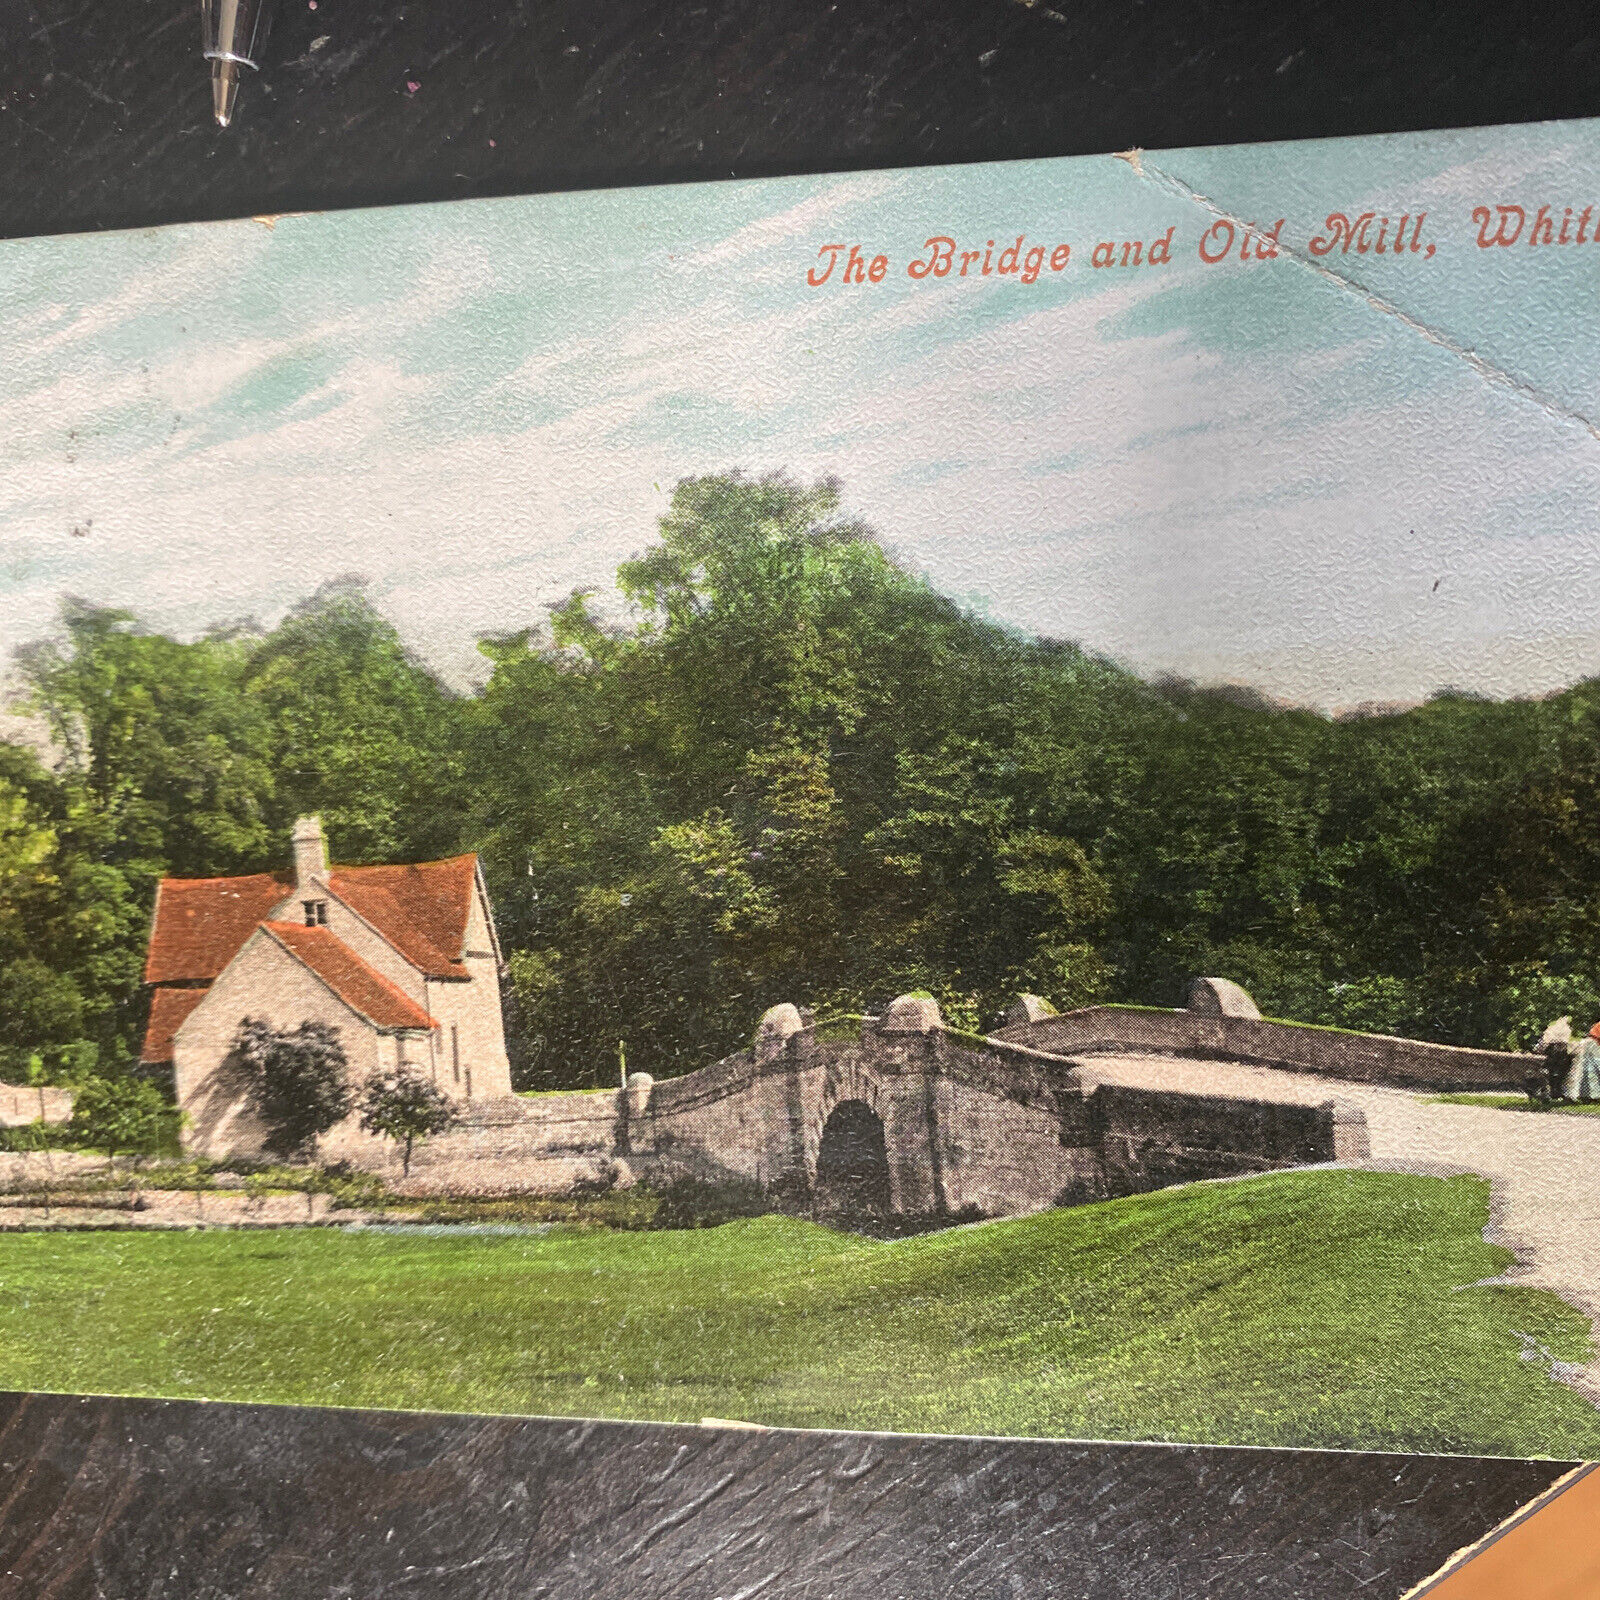 House Clearance - Bridge & Old Mill Whitley pc  1906